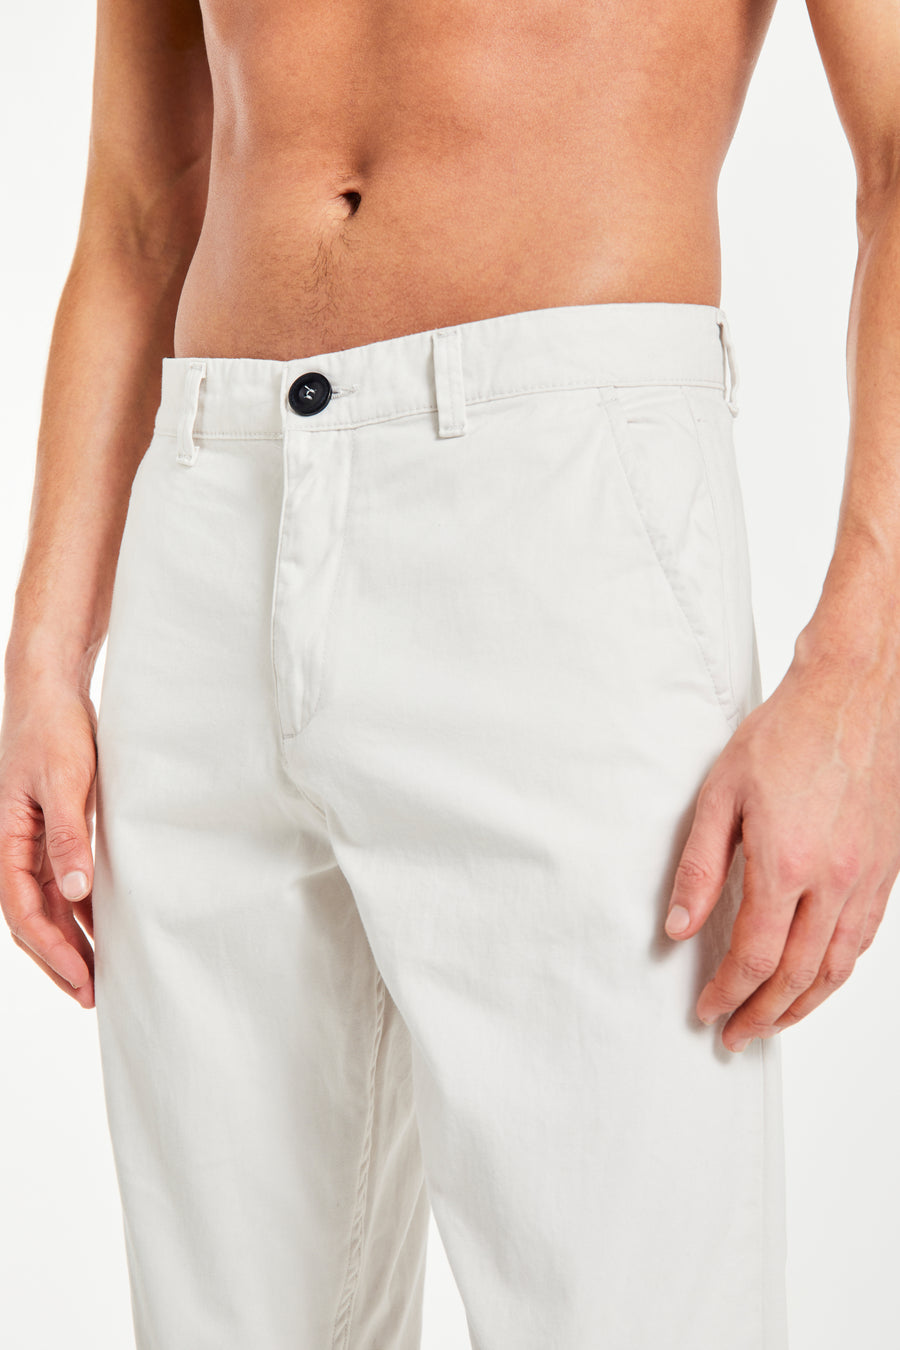 Close up of cheap men's chinos with black button